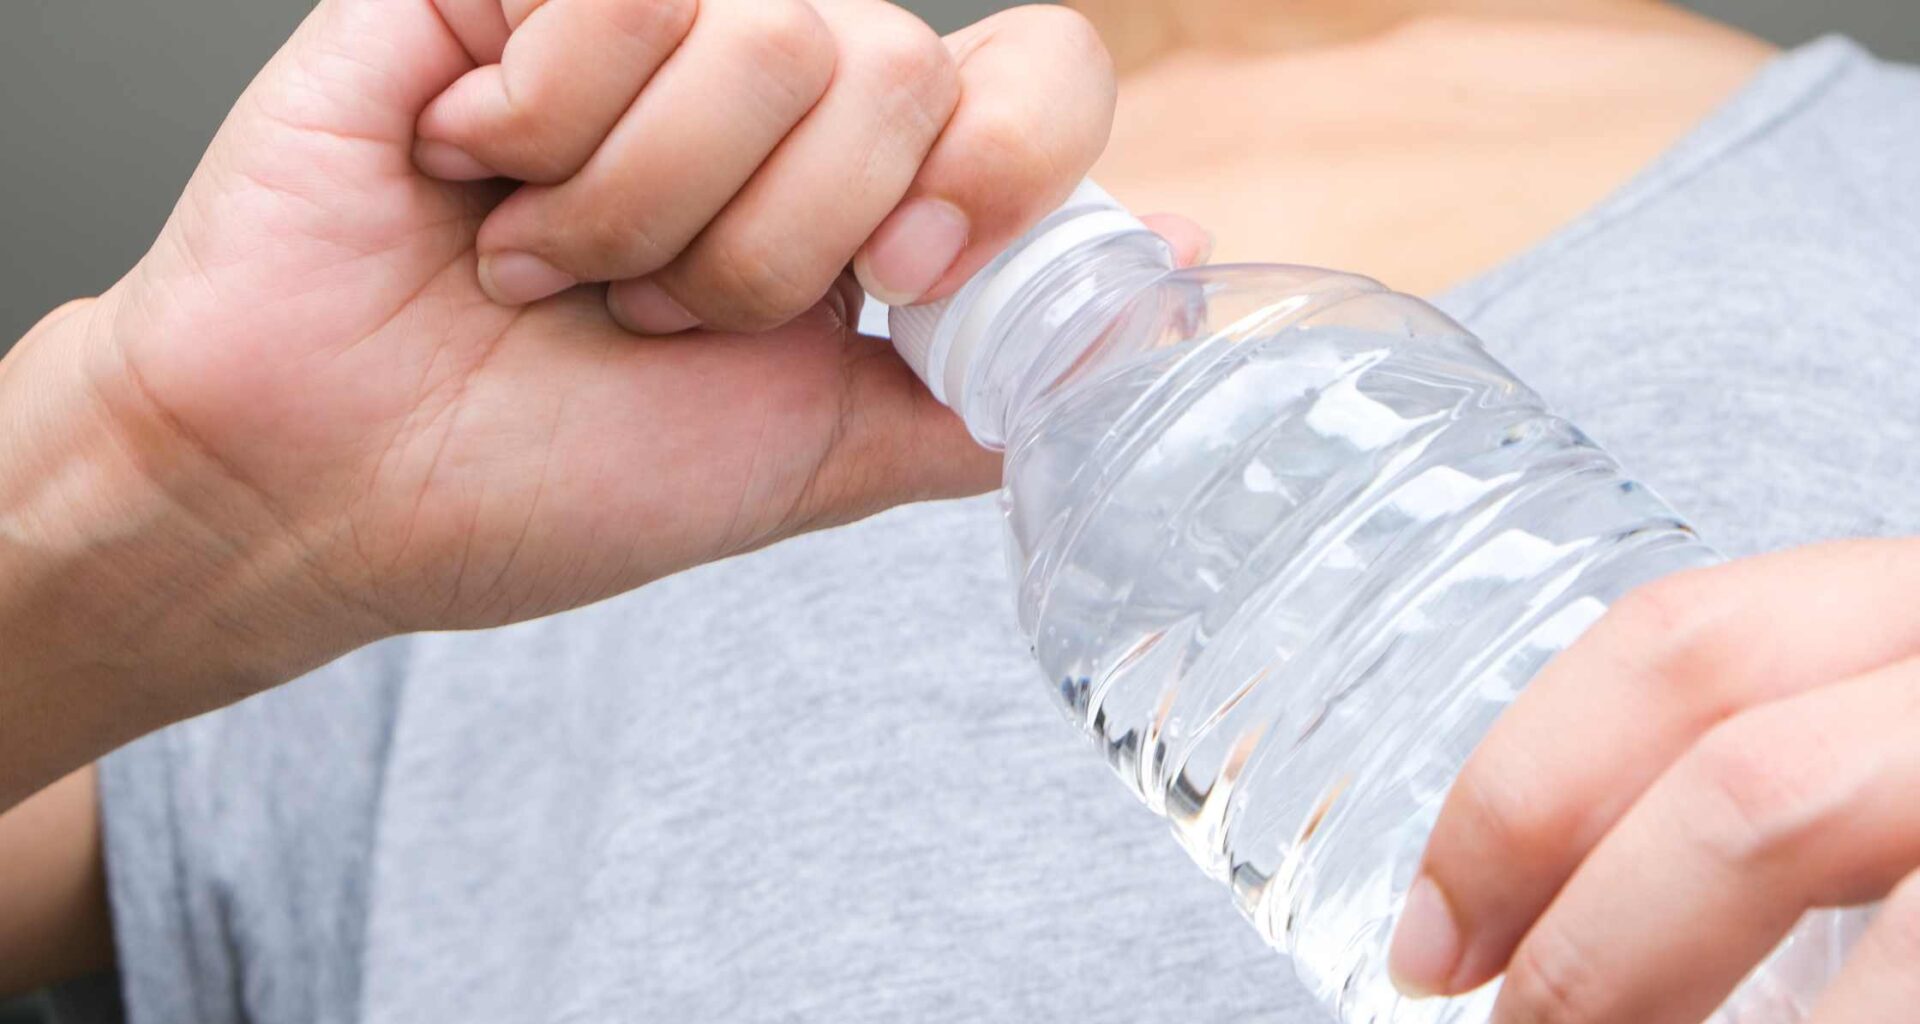 How to Open a Water Bottle Without Breaking the Seal?